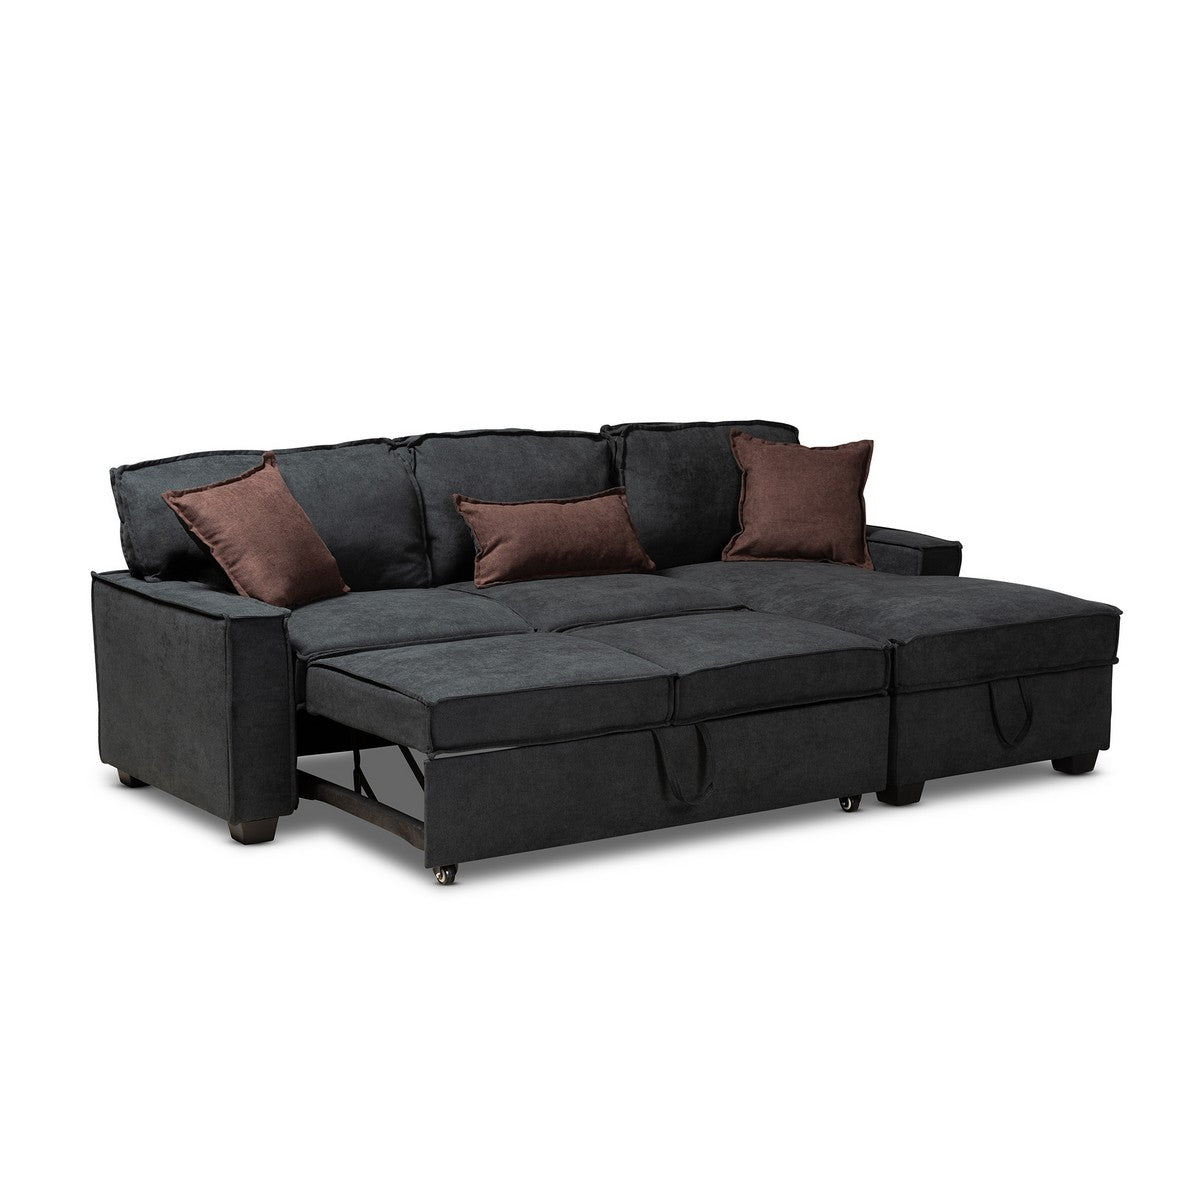 Baxton Studio Emile Modern and Contemporary Dark Grey Fabric Upholstered Right Facing Storage Sectional Sofa with Pull-Out Bed Baxton Studio-sectionals-Minimal And Modern - 1